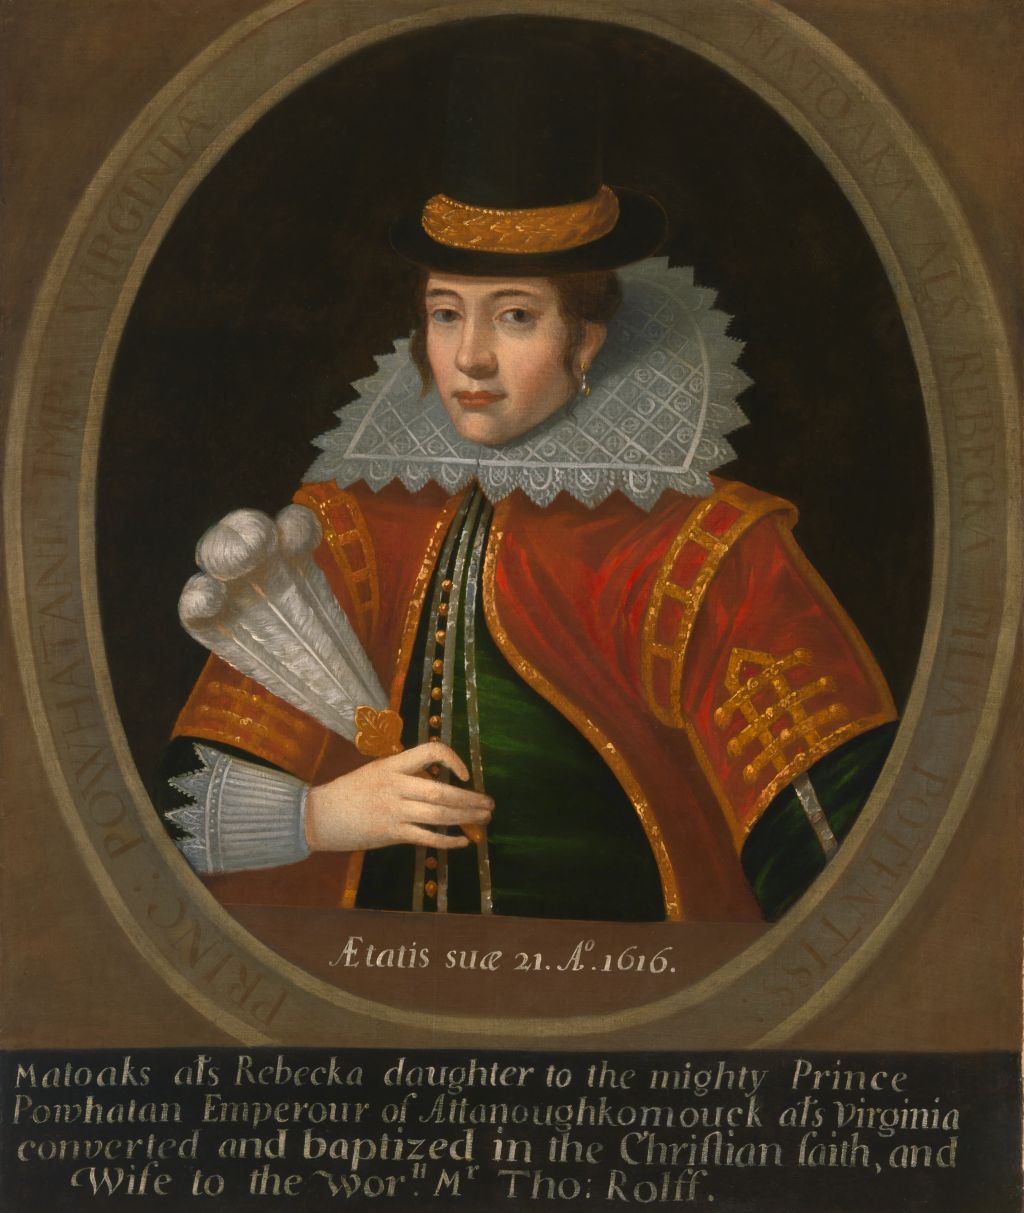 Pocahontas died in England after marrying Virginia planter John Rolfe. National Portrait Gallery.